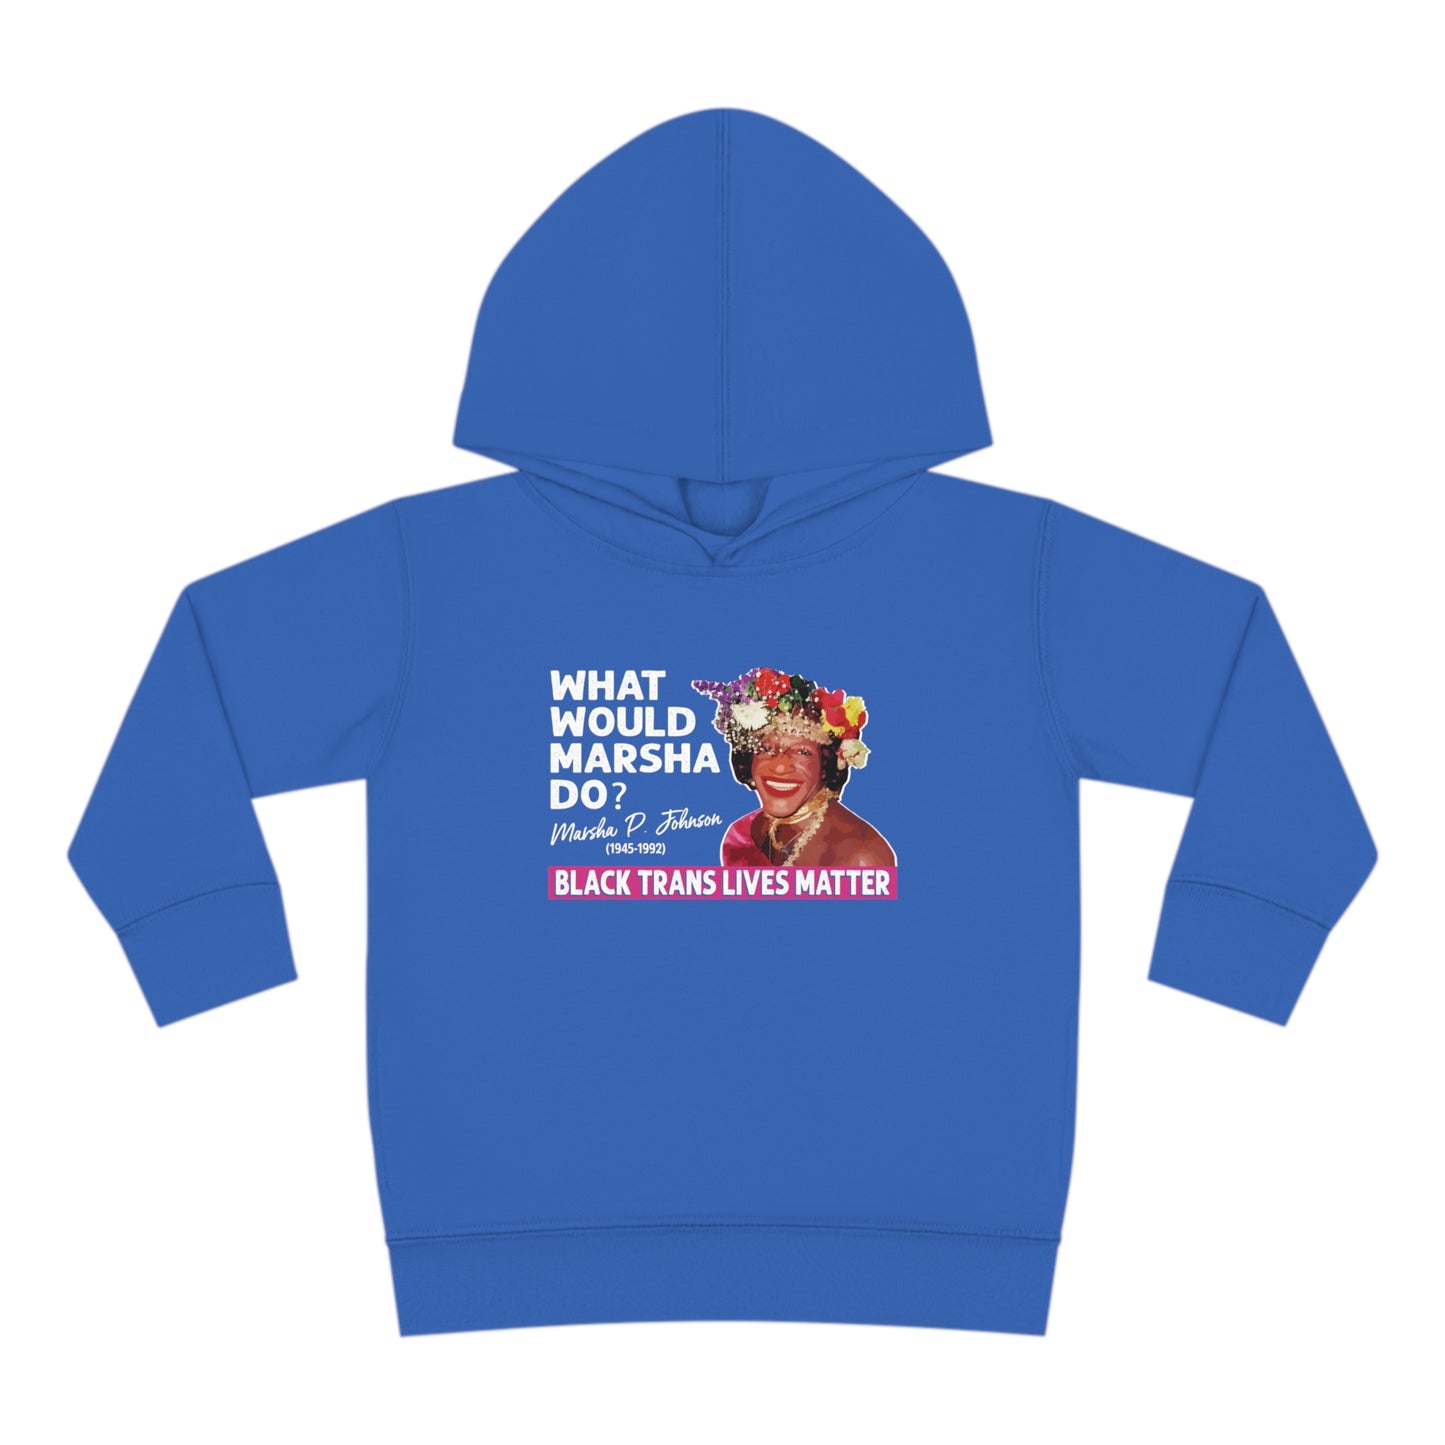 “What Would Marsha Do?” Toddler Hoodie